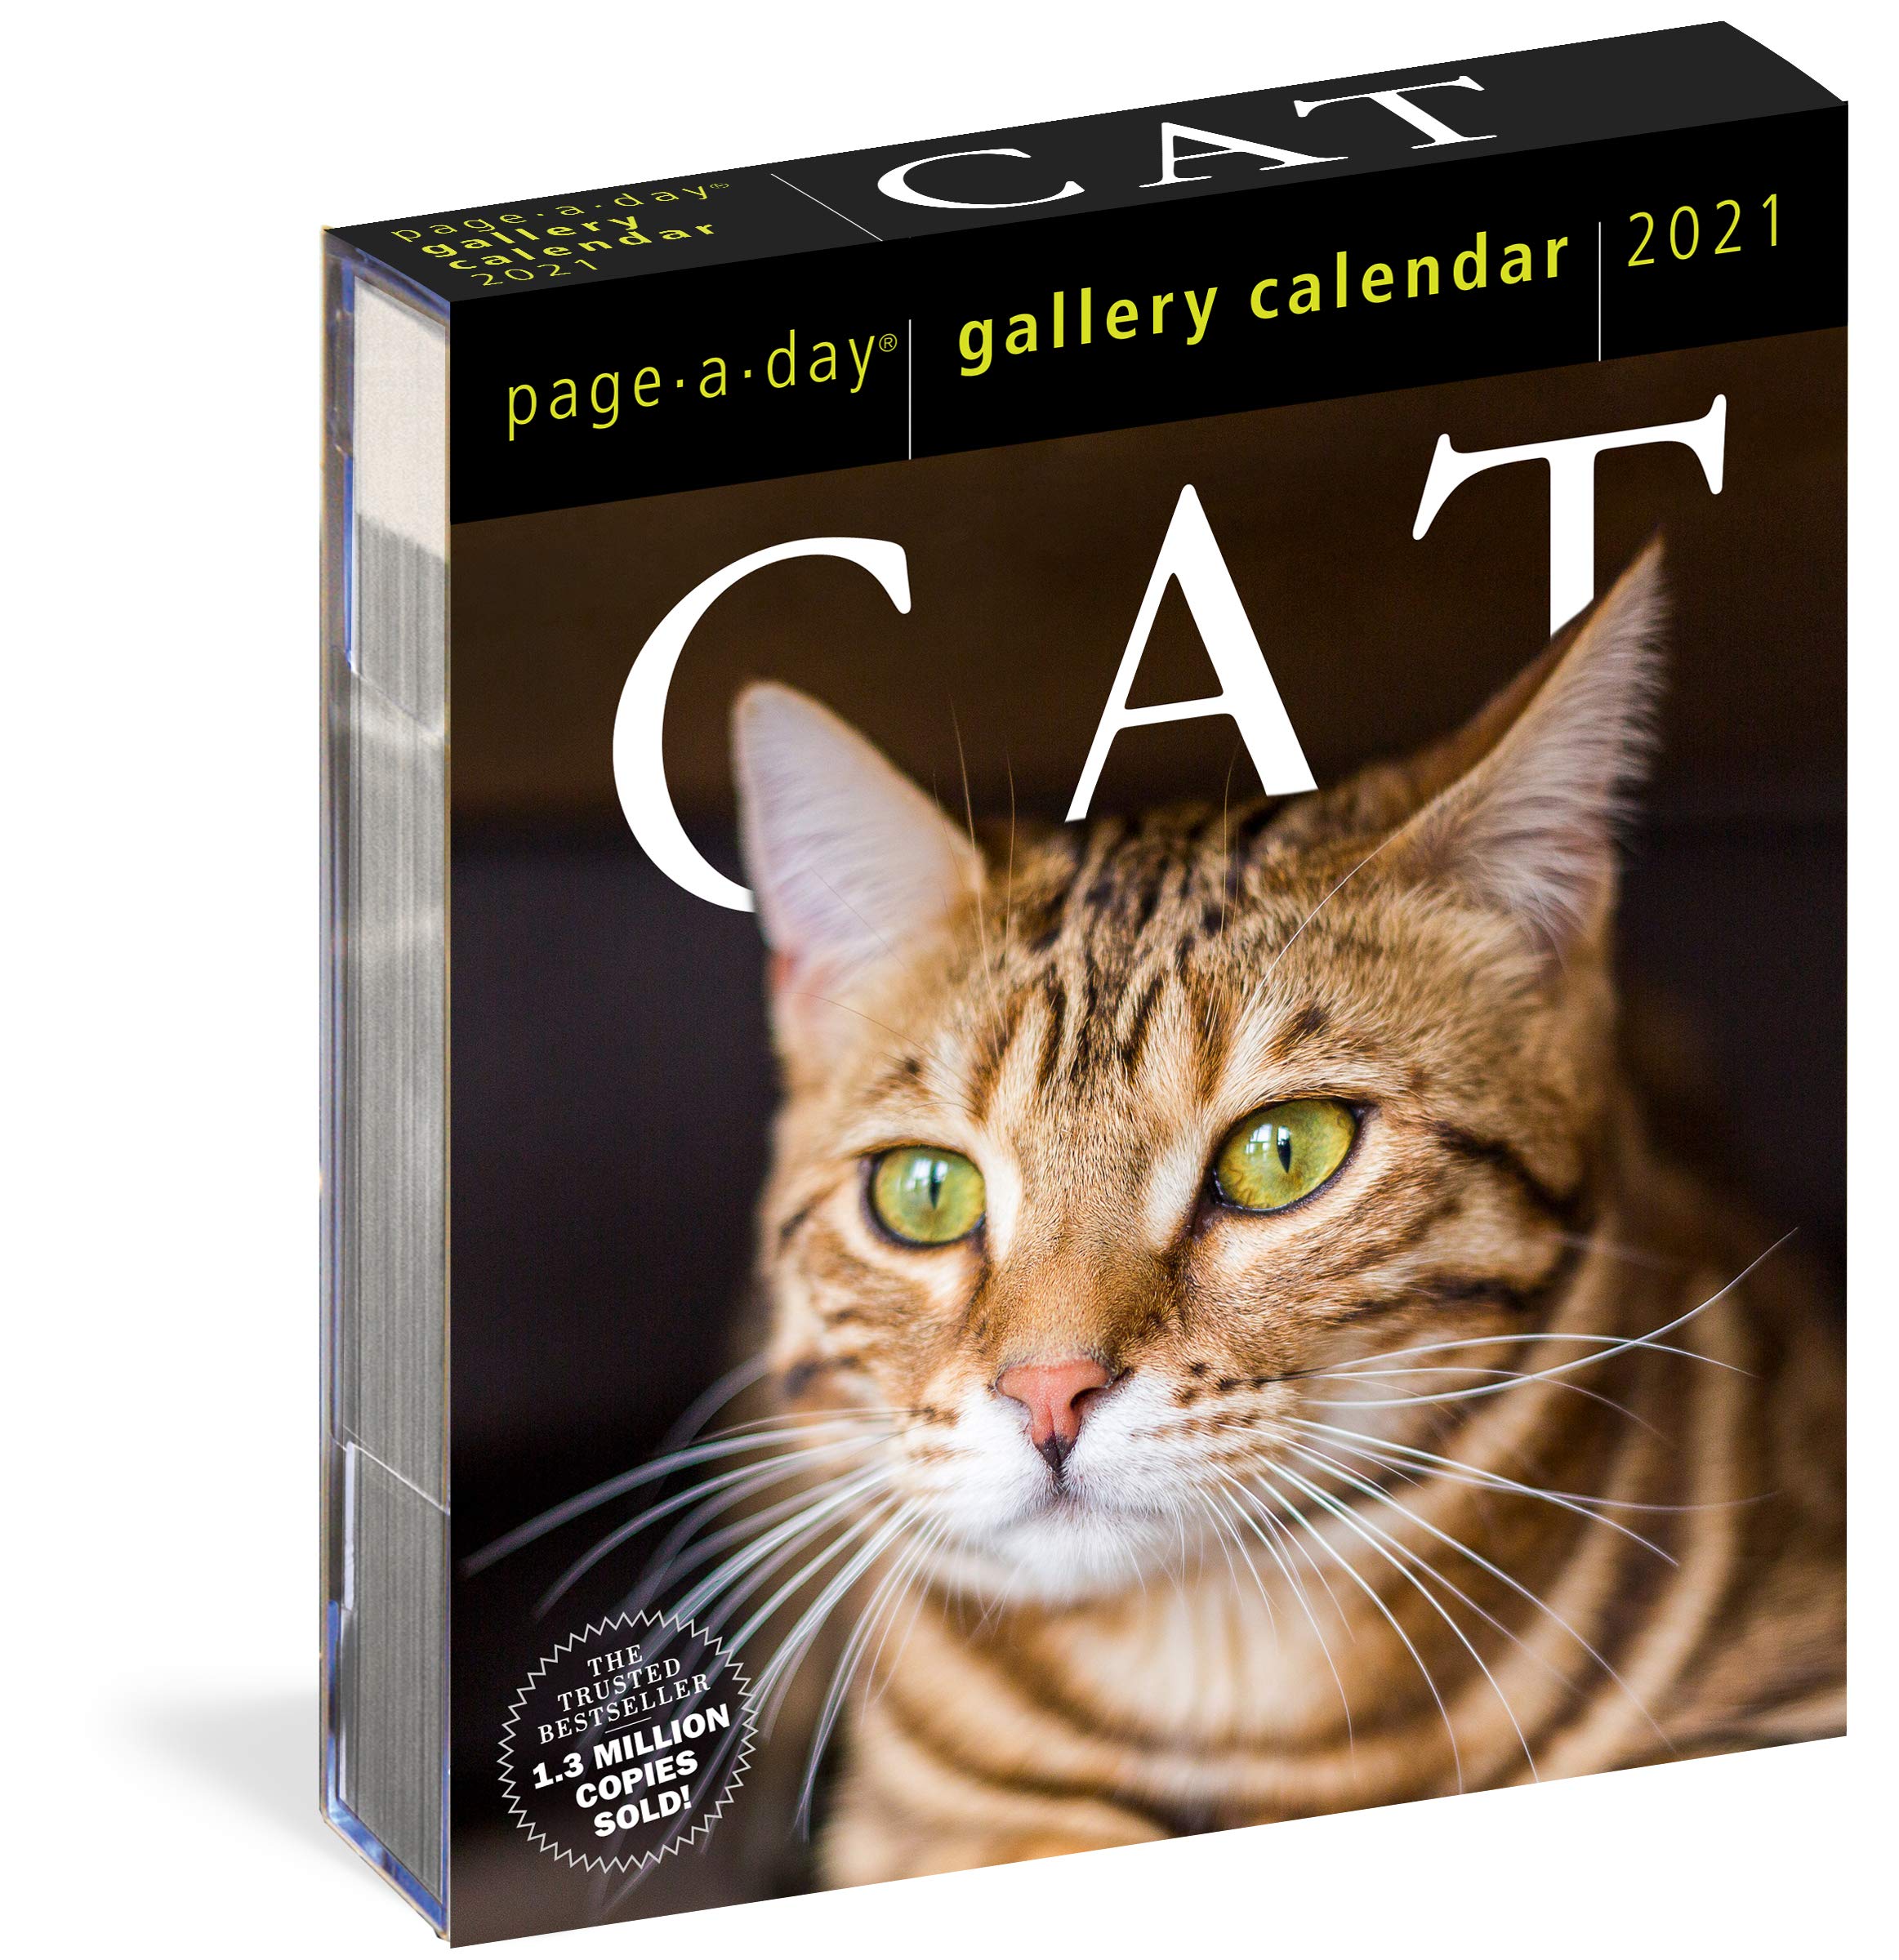 calendar-2021-cat-page-a-day-gallery-workman-publishing